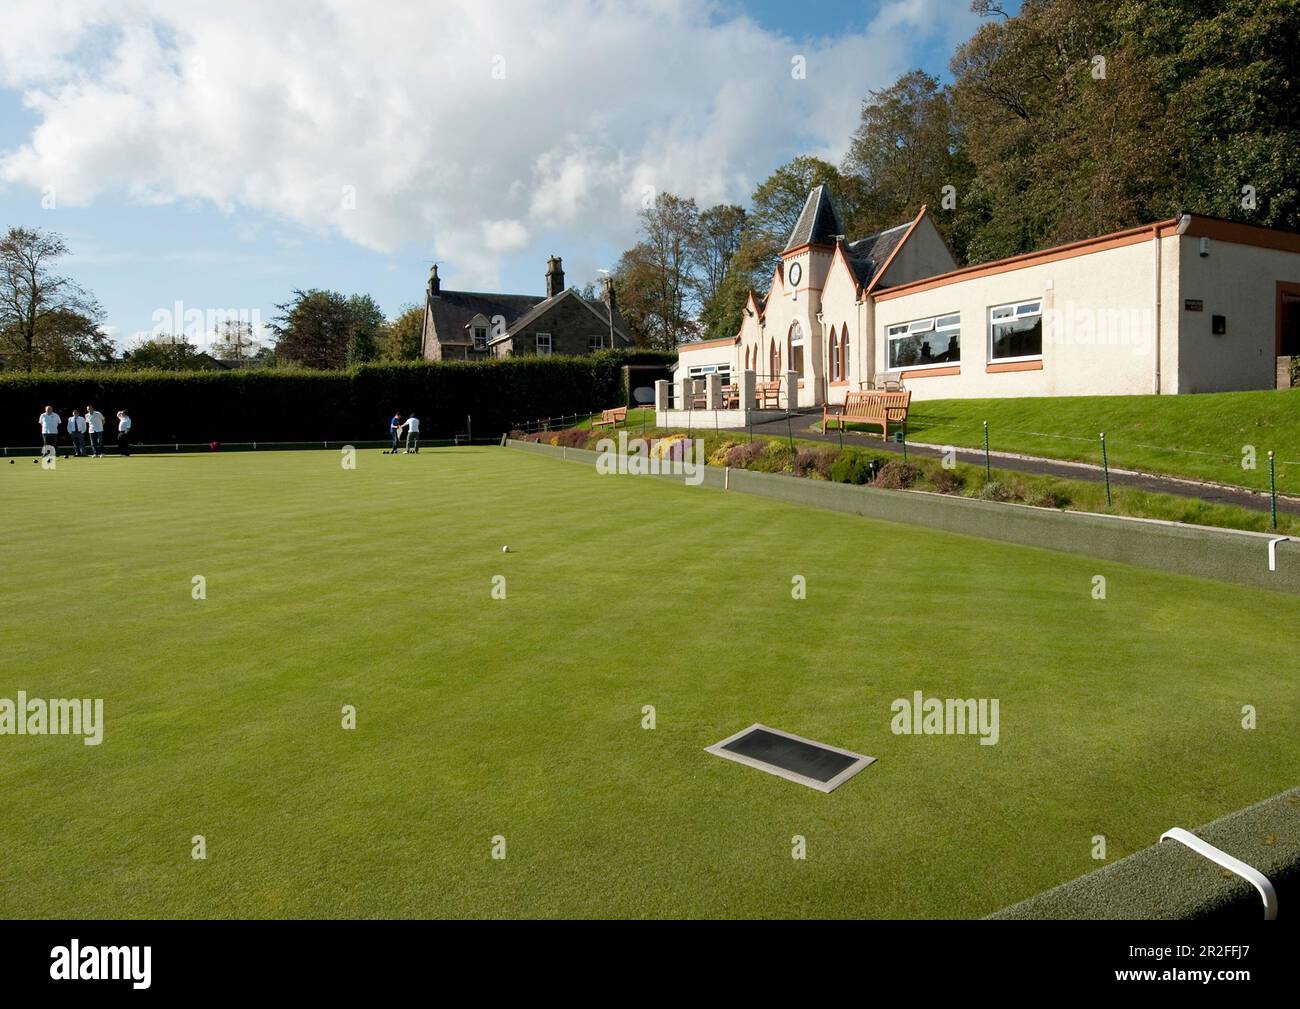 Bowls in play in front of the pavilion of the Stirling lawn bowling club green in Stirling, Scotland, UK Stock Photo